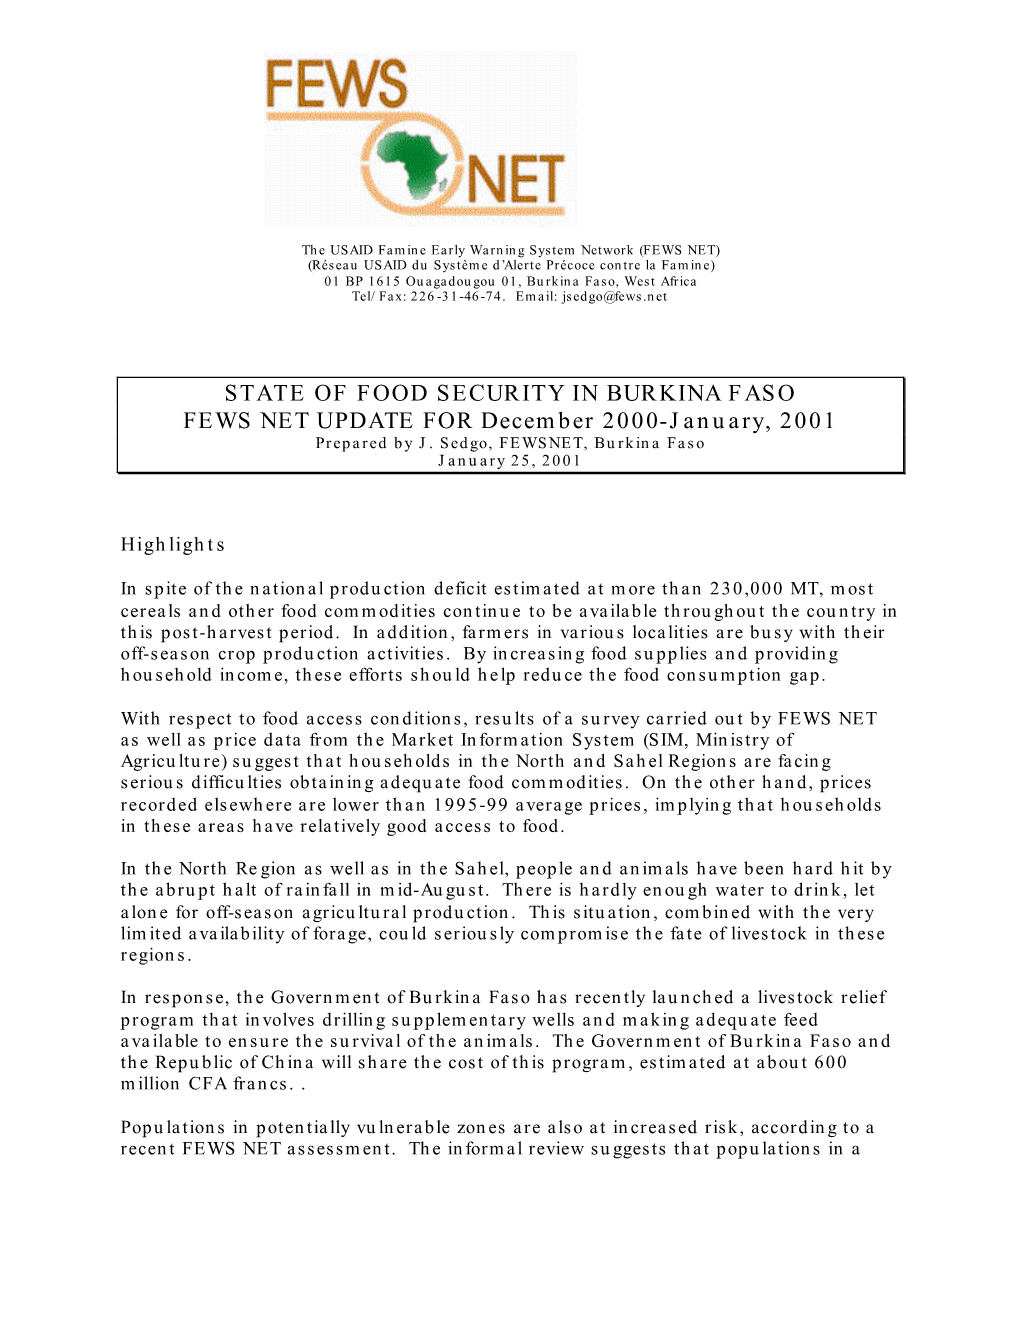 STATE of FOOD SECURITY in BURKINA FASO FEWS NET UPDATE for December 2000-January, 2001 Prepared by J